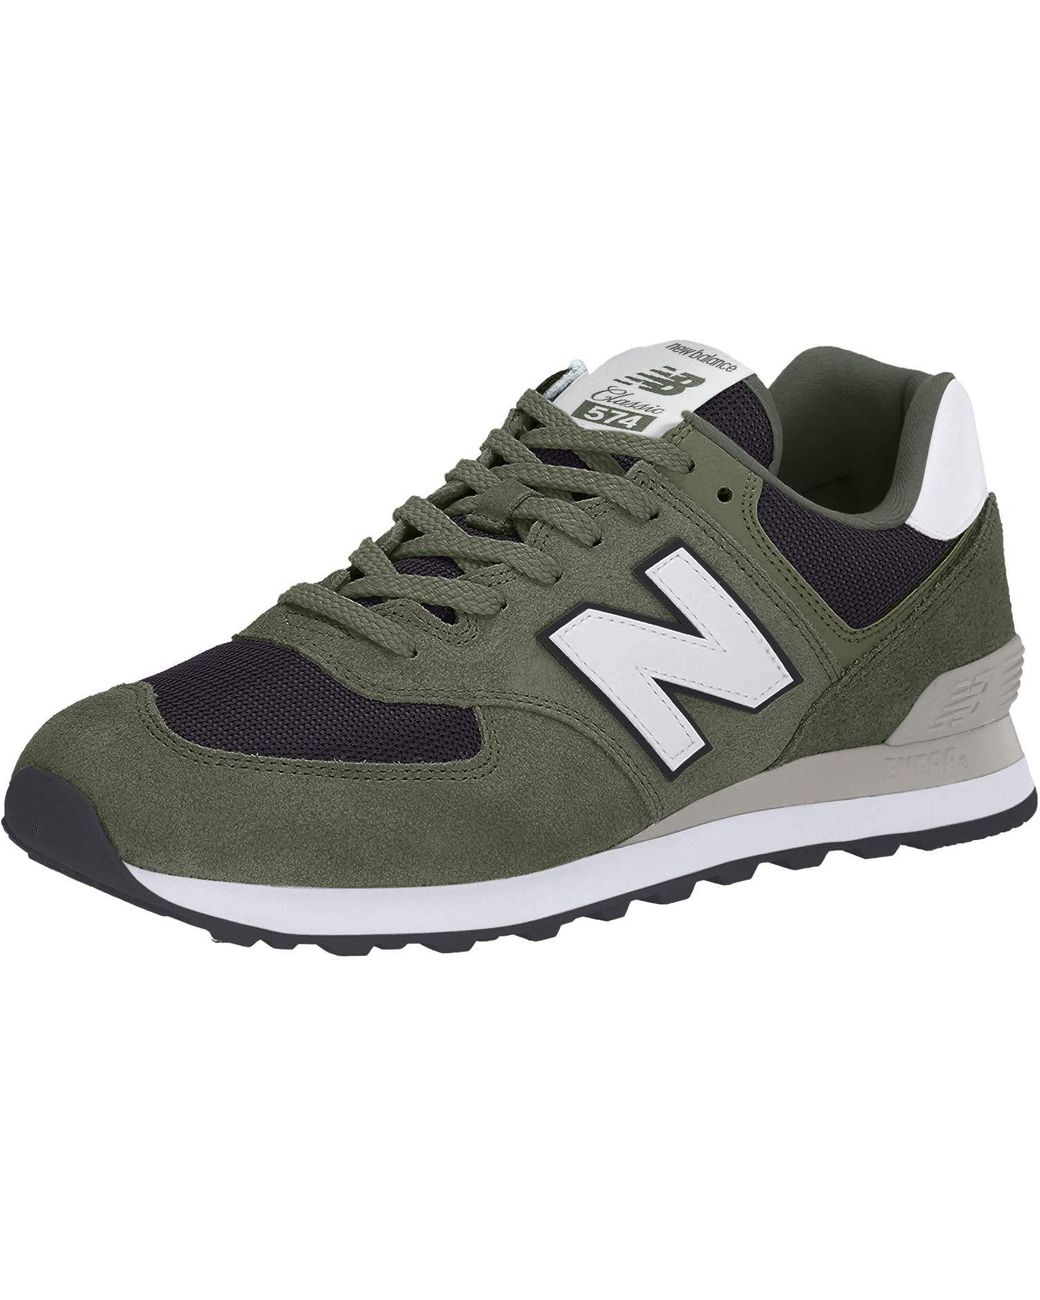 New Balance Synthetic 574 V2 Essential Sneaker for Men - Save 74% - Lyst